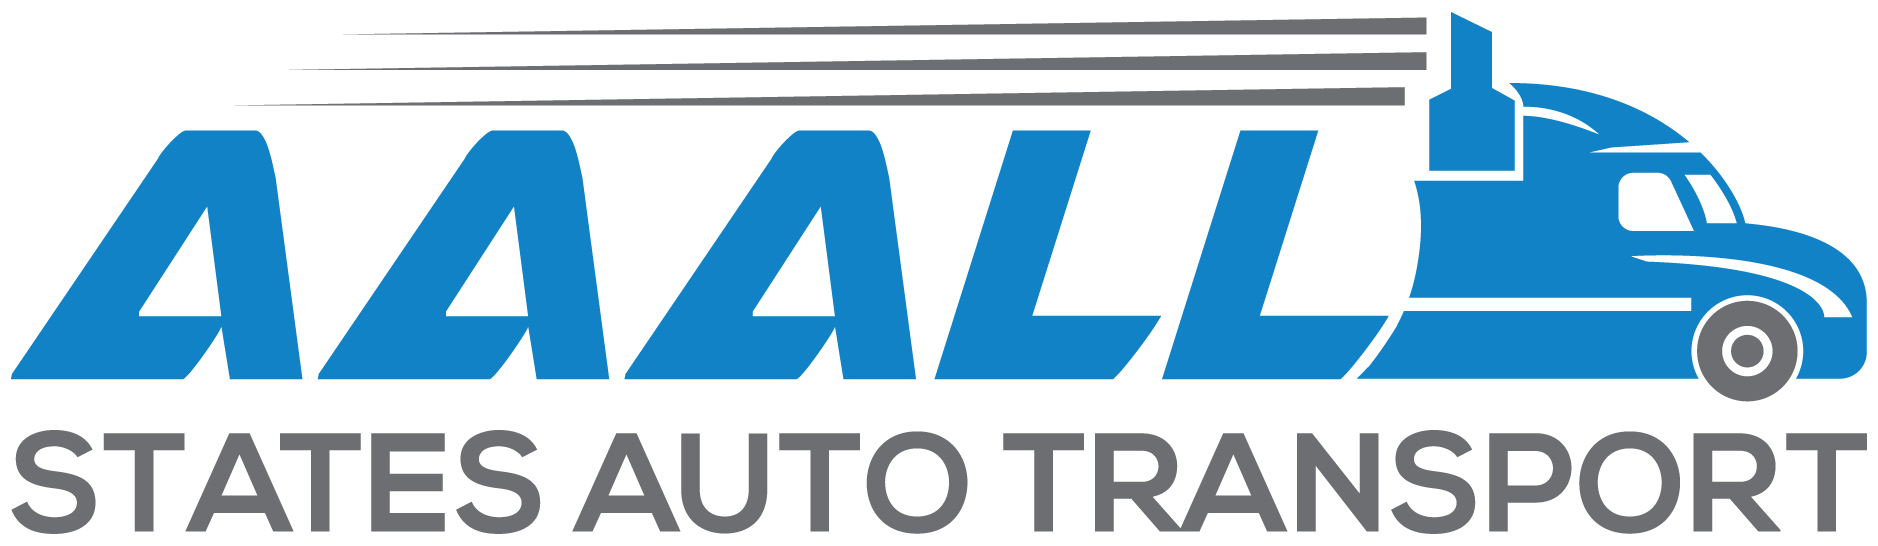 Aaall States Auto Transport | Ship Nationwide - Zero Down